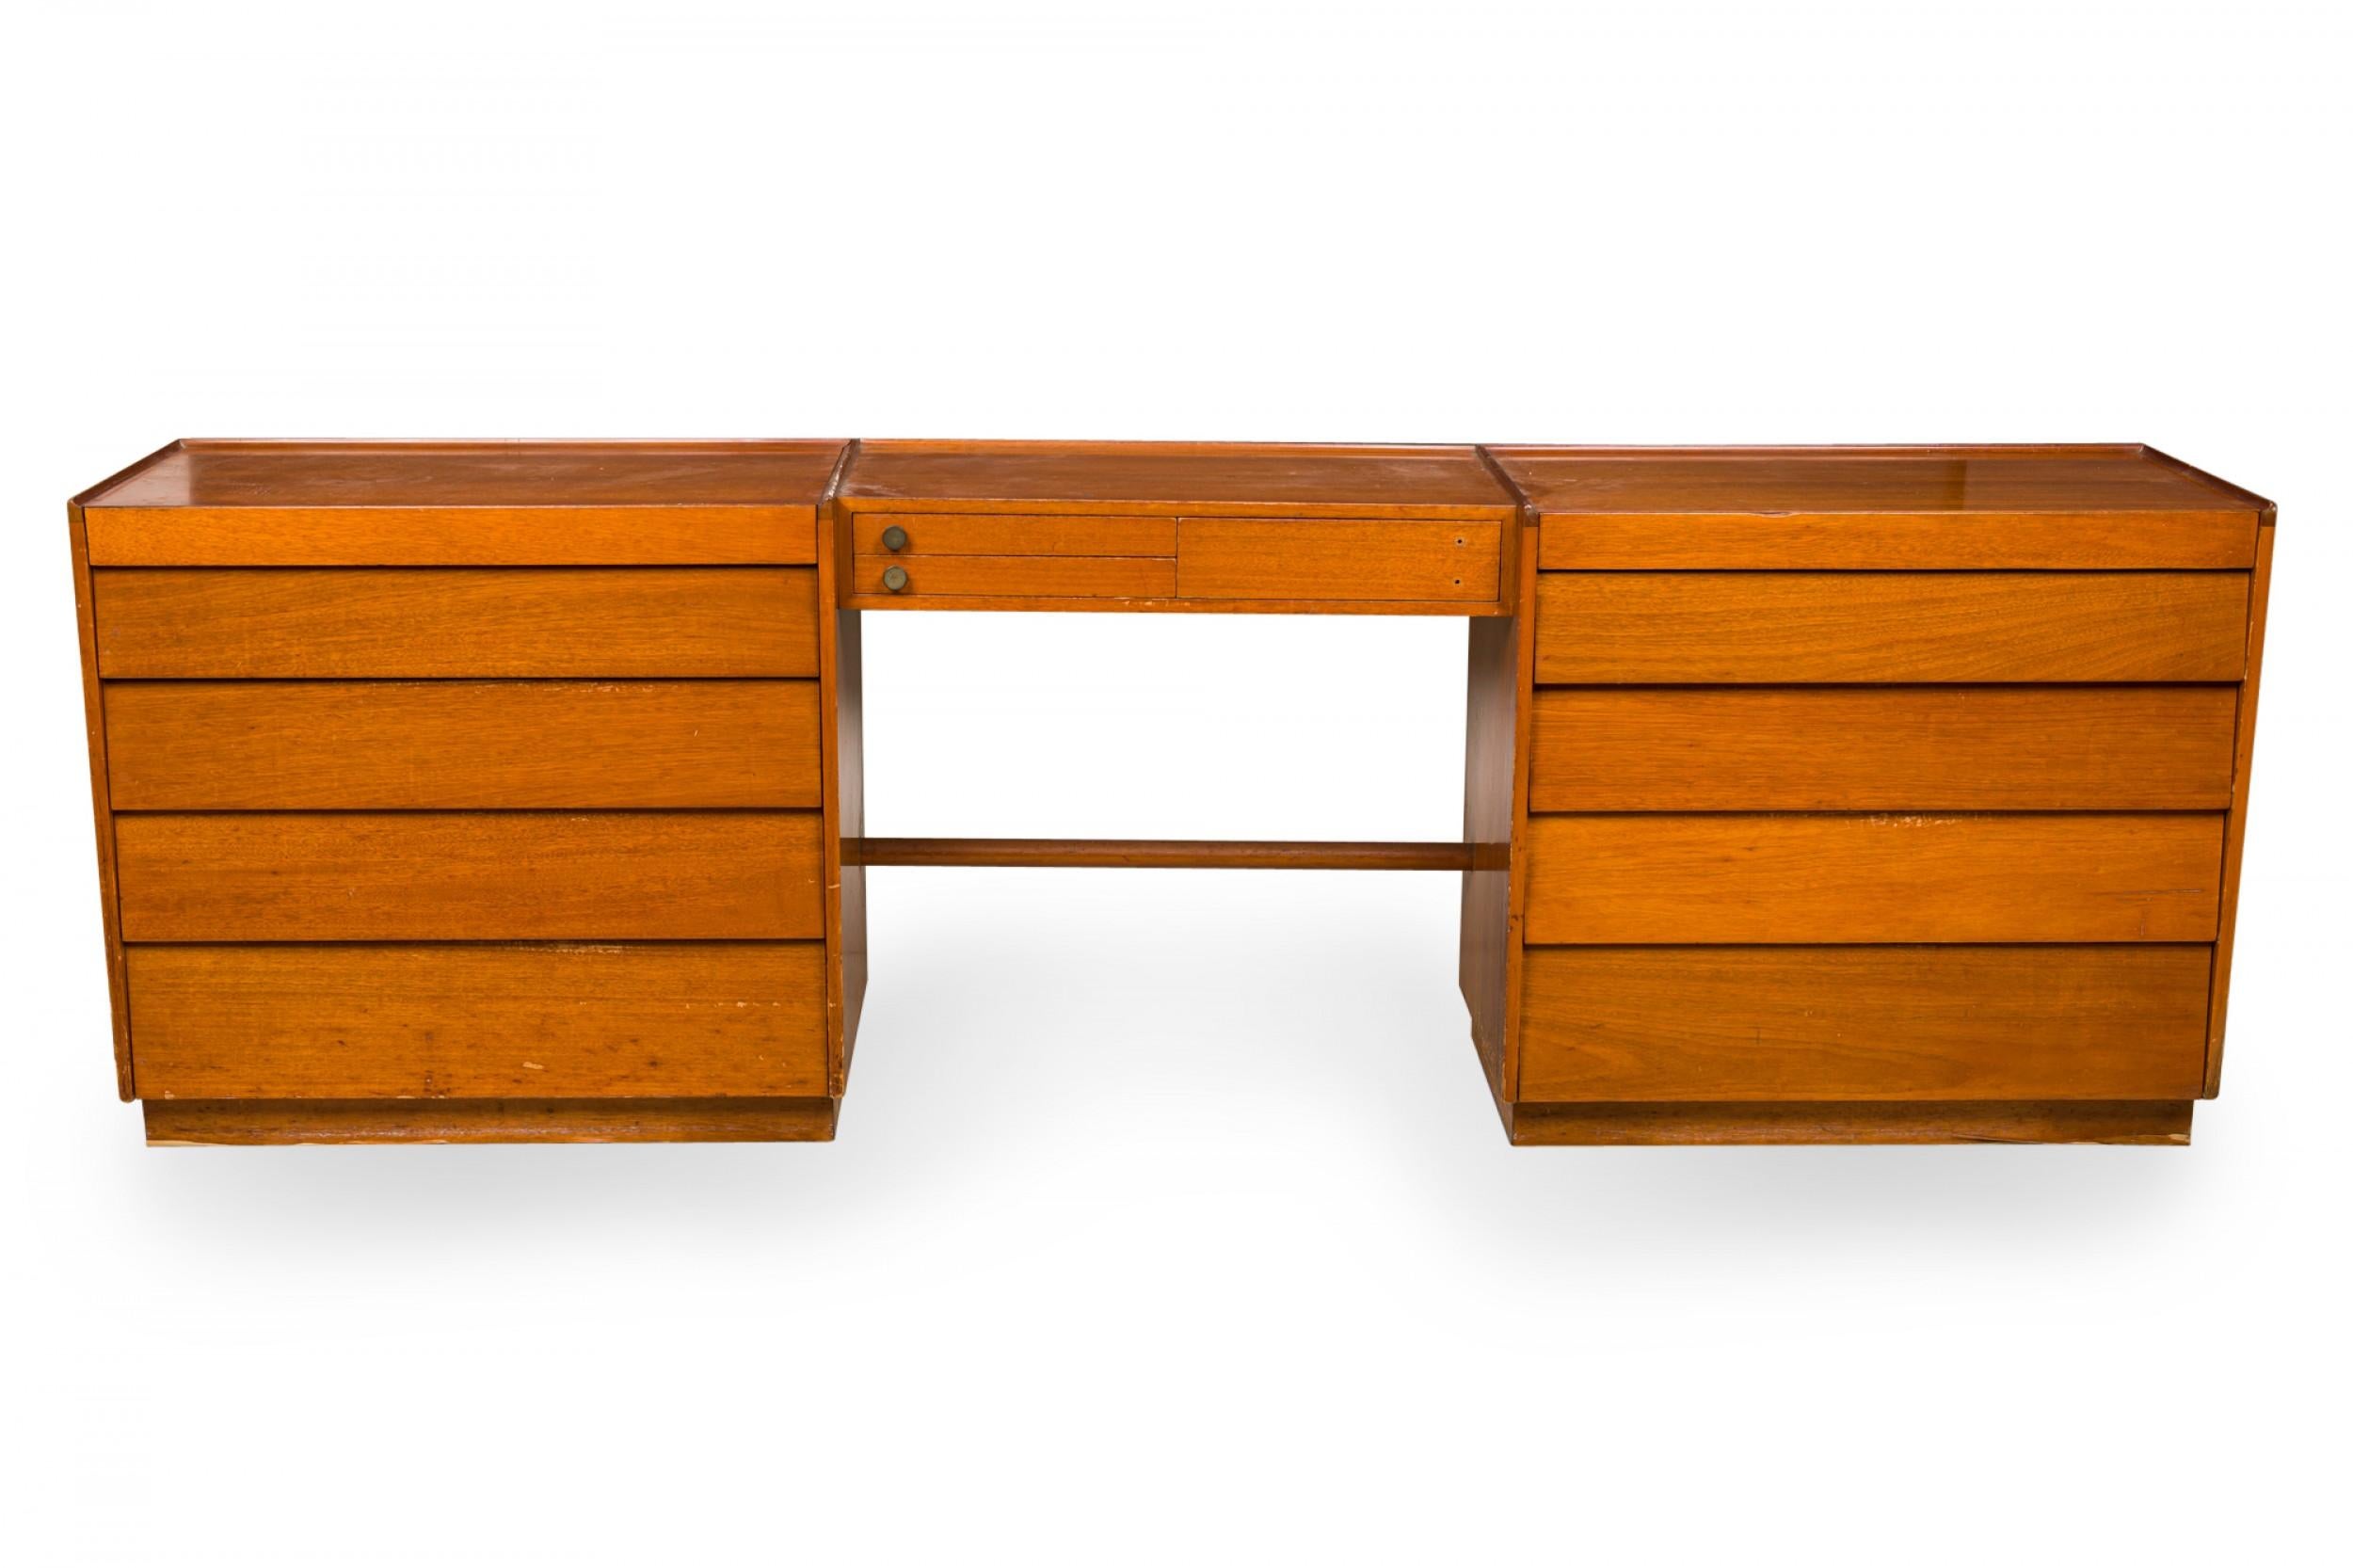 American mid-century wooden dressing table / vanity cabinet with two sections of drawers on either side of a knee hole opening. (EDWARD WORMLEY FOR DUNBAR)